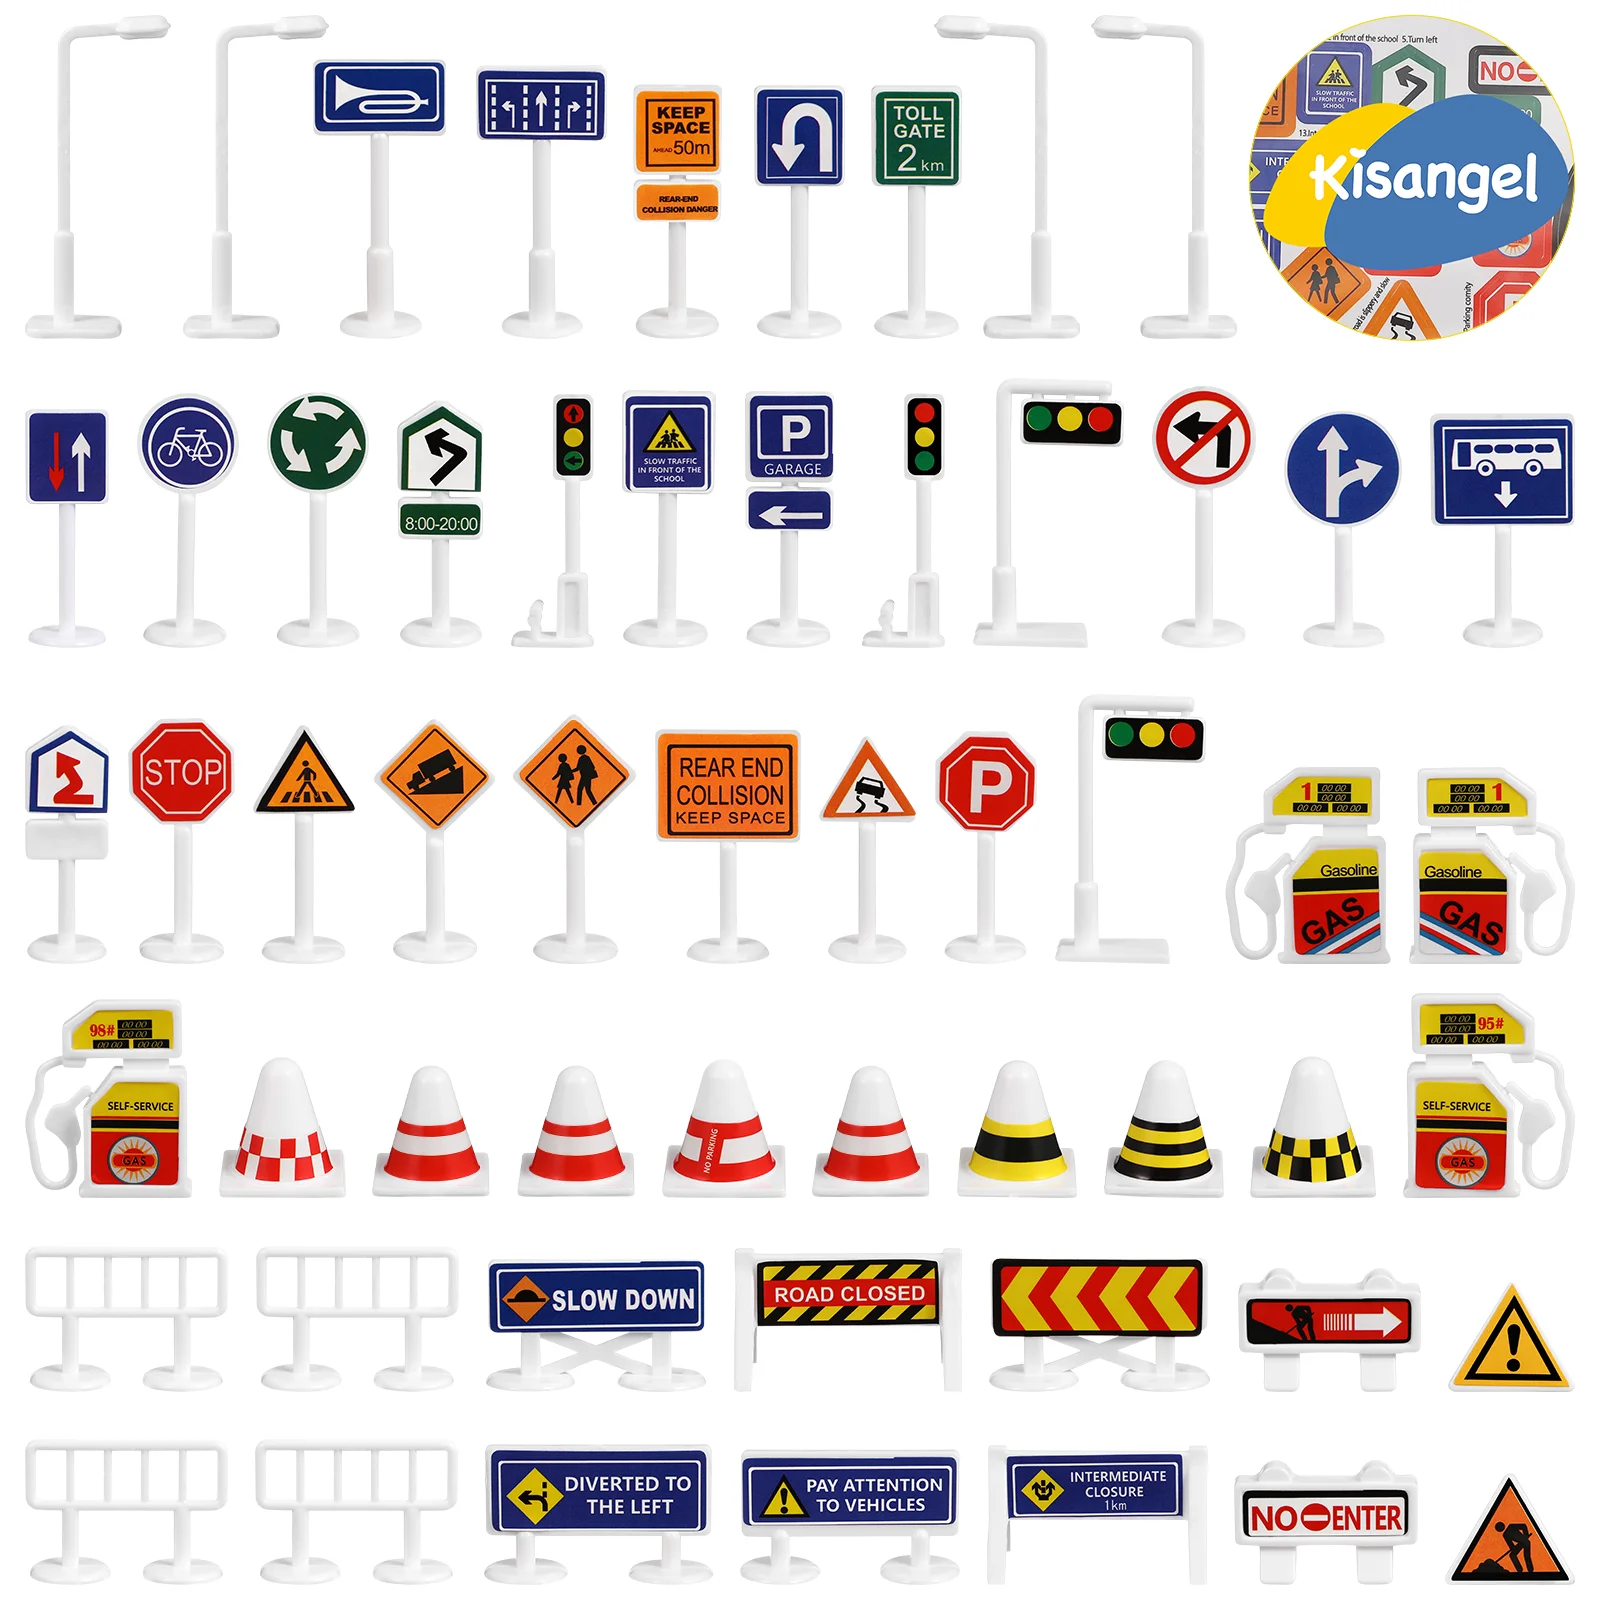 Mini Traffic Signs Model Road Block Models Road Signal Toys Fences Parking Children Safety Educational Toys